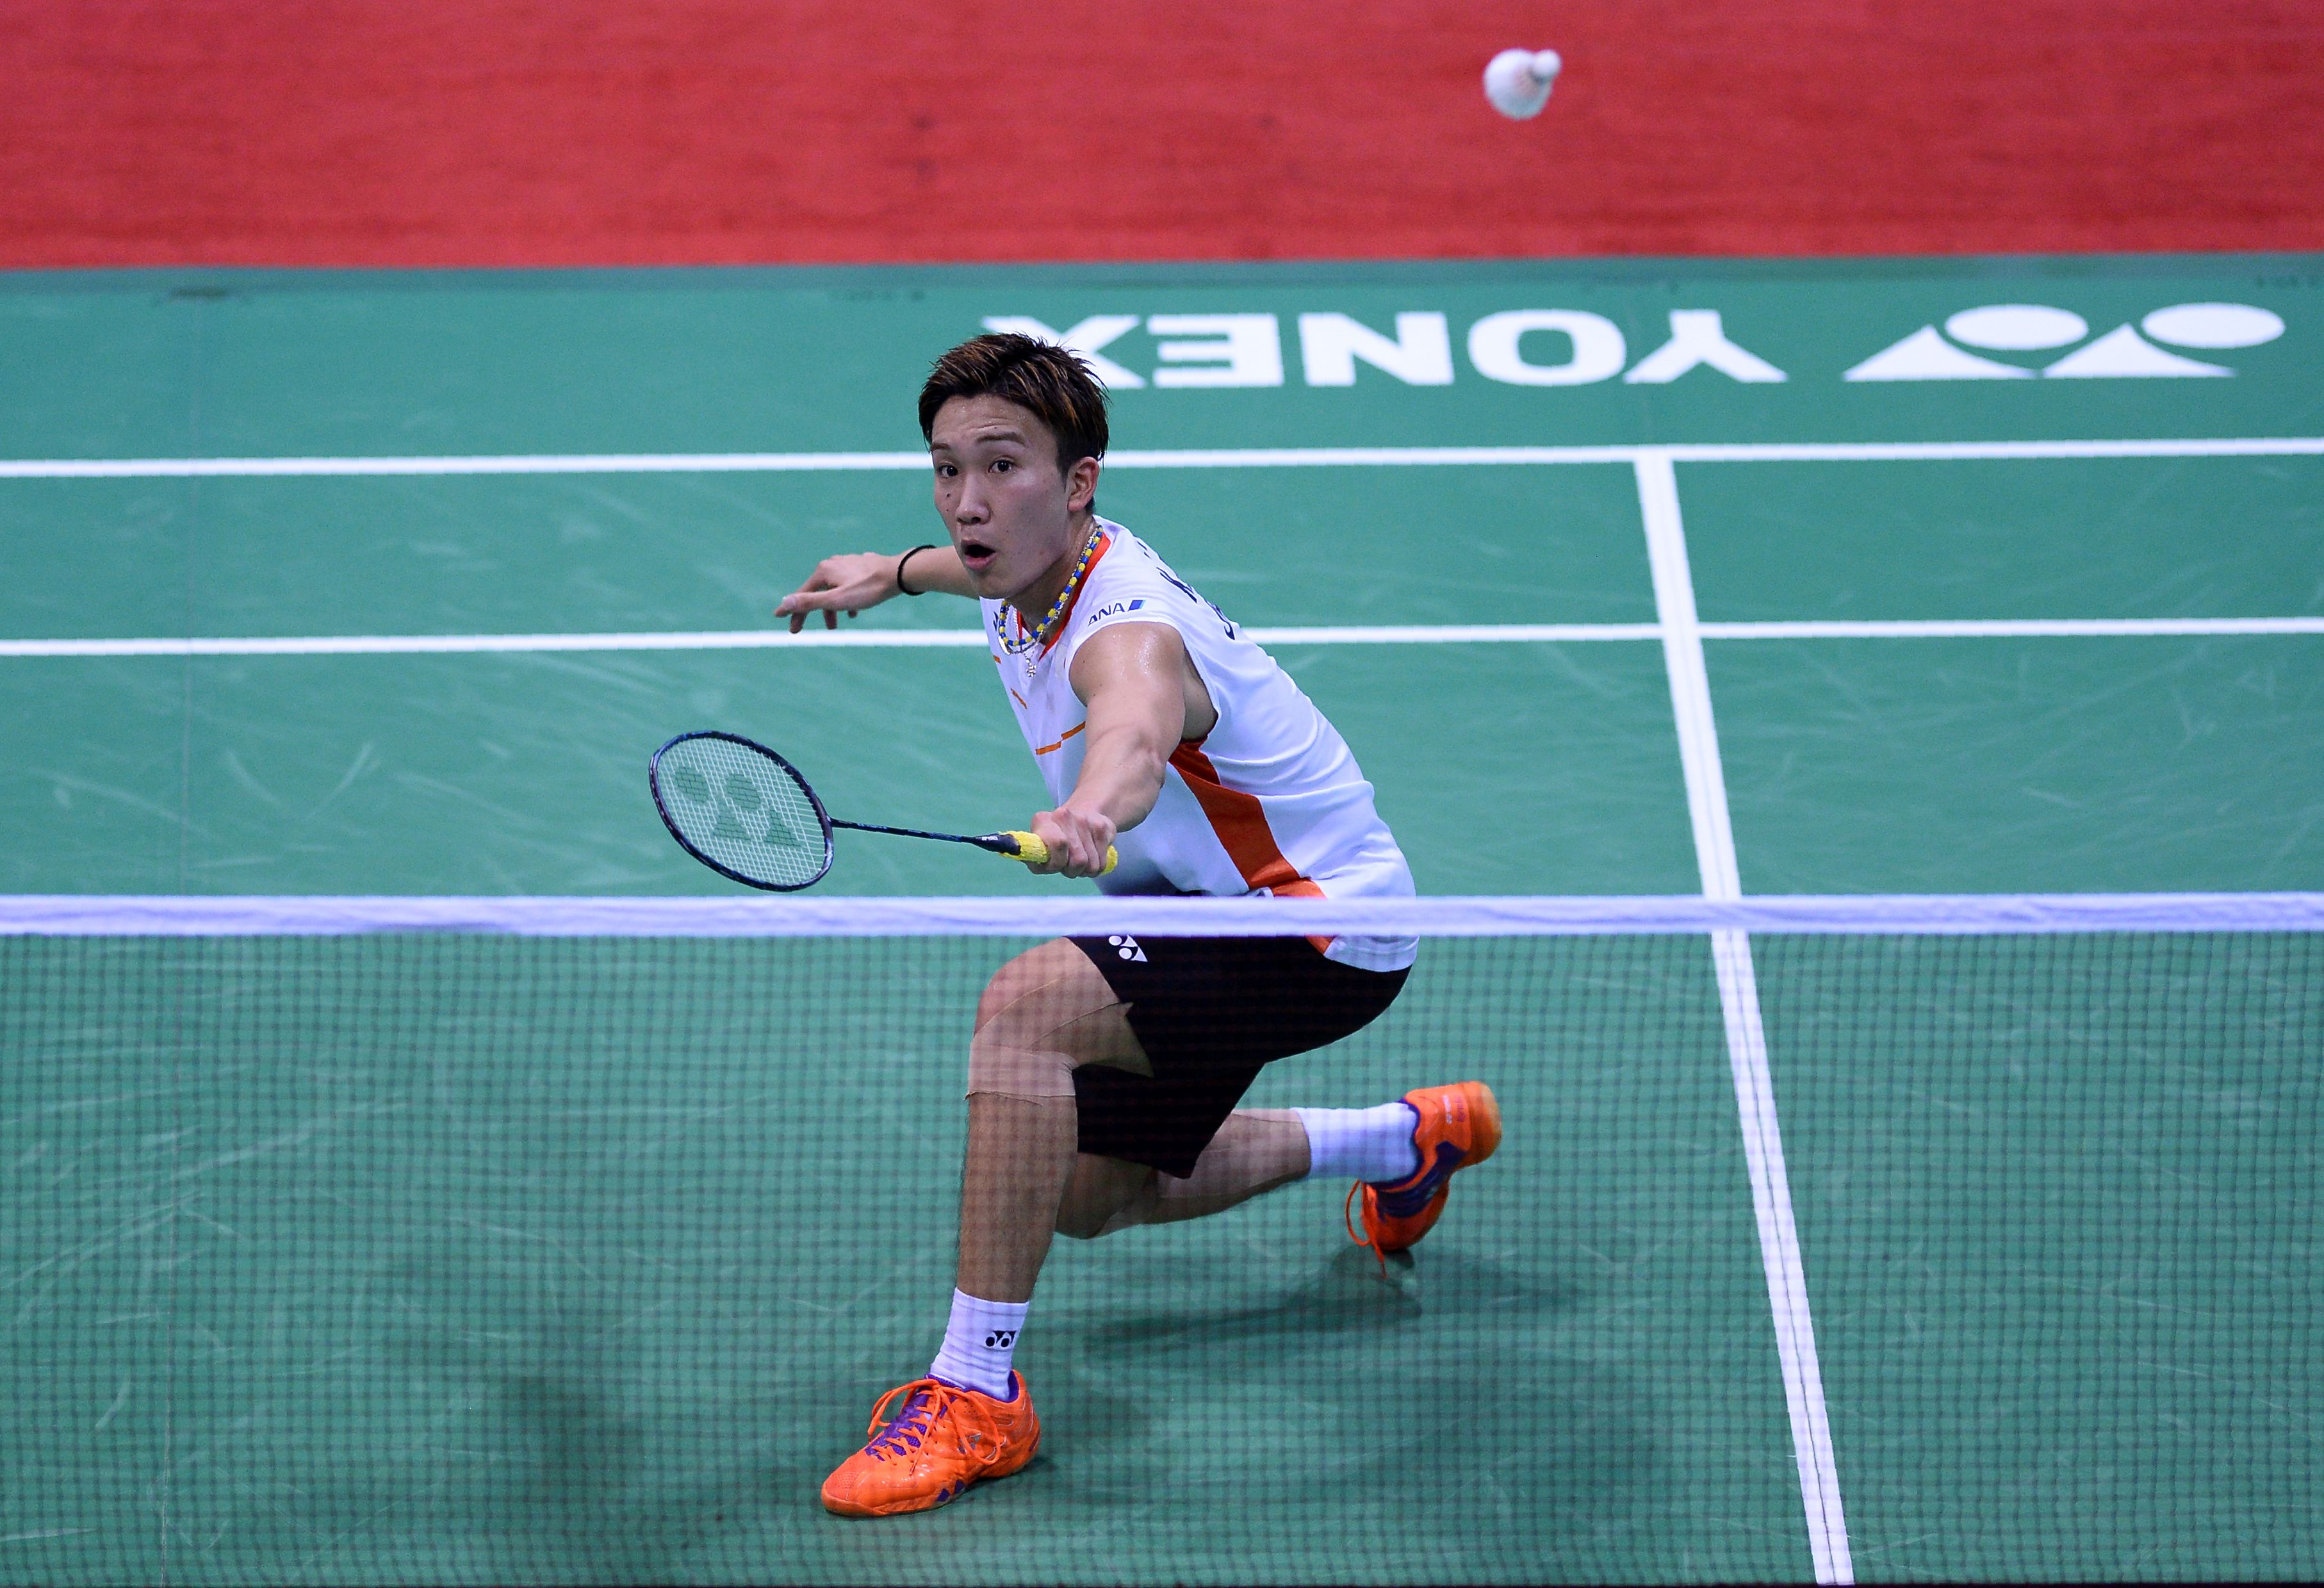 Kento Momota plays a shot during his men's singles semifinal match against China's Xue Song at the Yonex-Sunrise India Open 2016 badminton tournament in New Delhi on Saturday. | AFP-JIJI